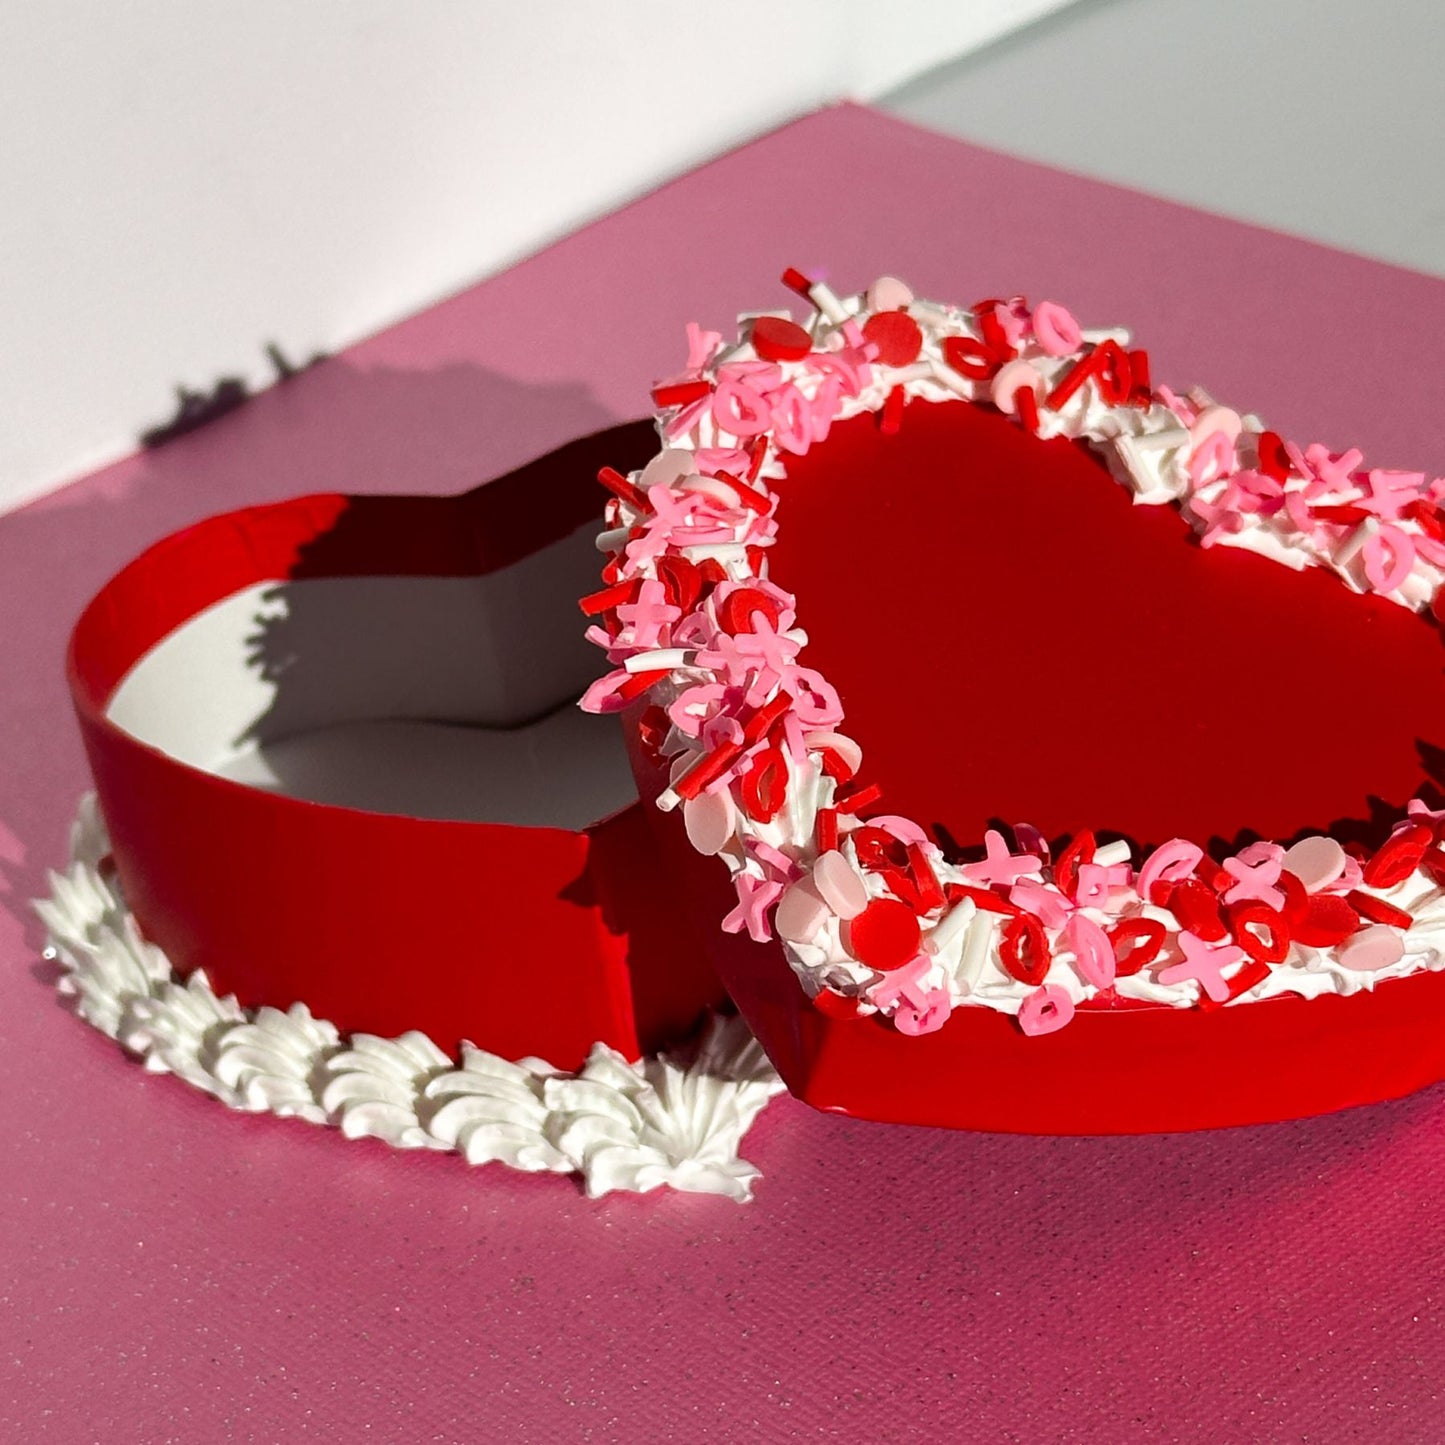 3D Painted Cake - Heart Box Red With Valentine's Day Sprinkles